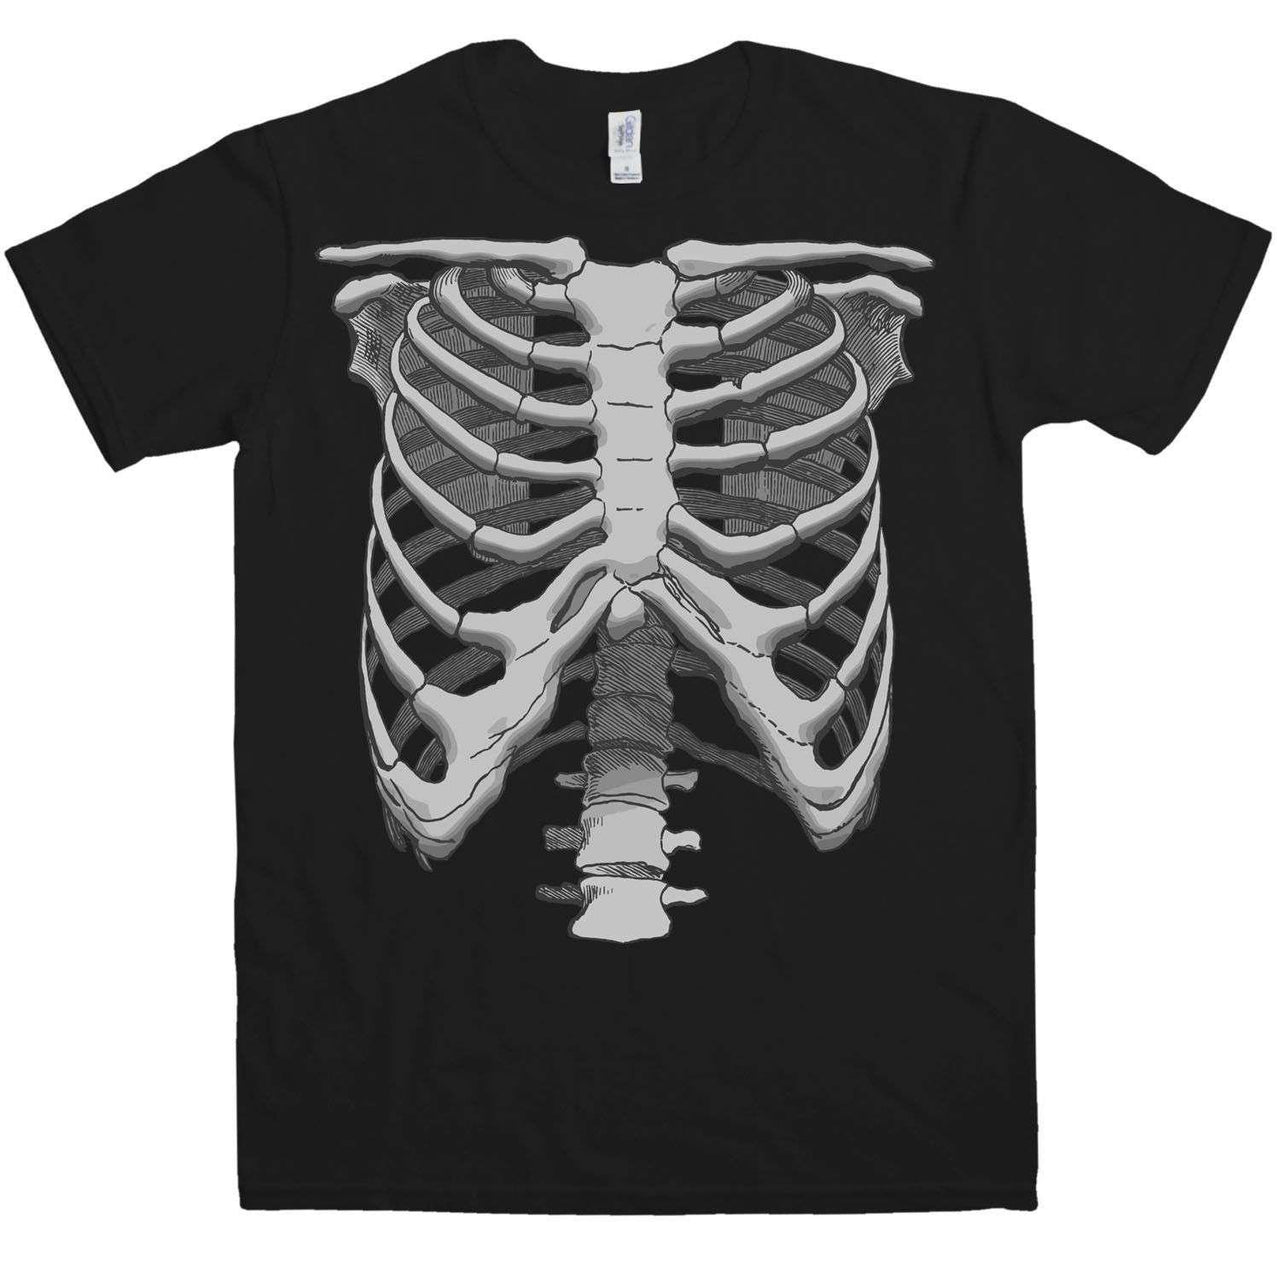 Rib Cage Graphic T-Shirt For Men 8Ball